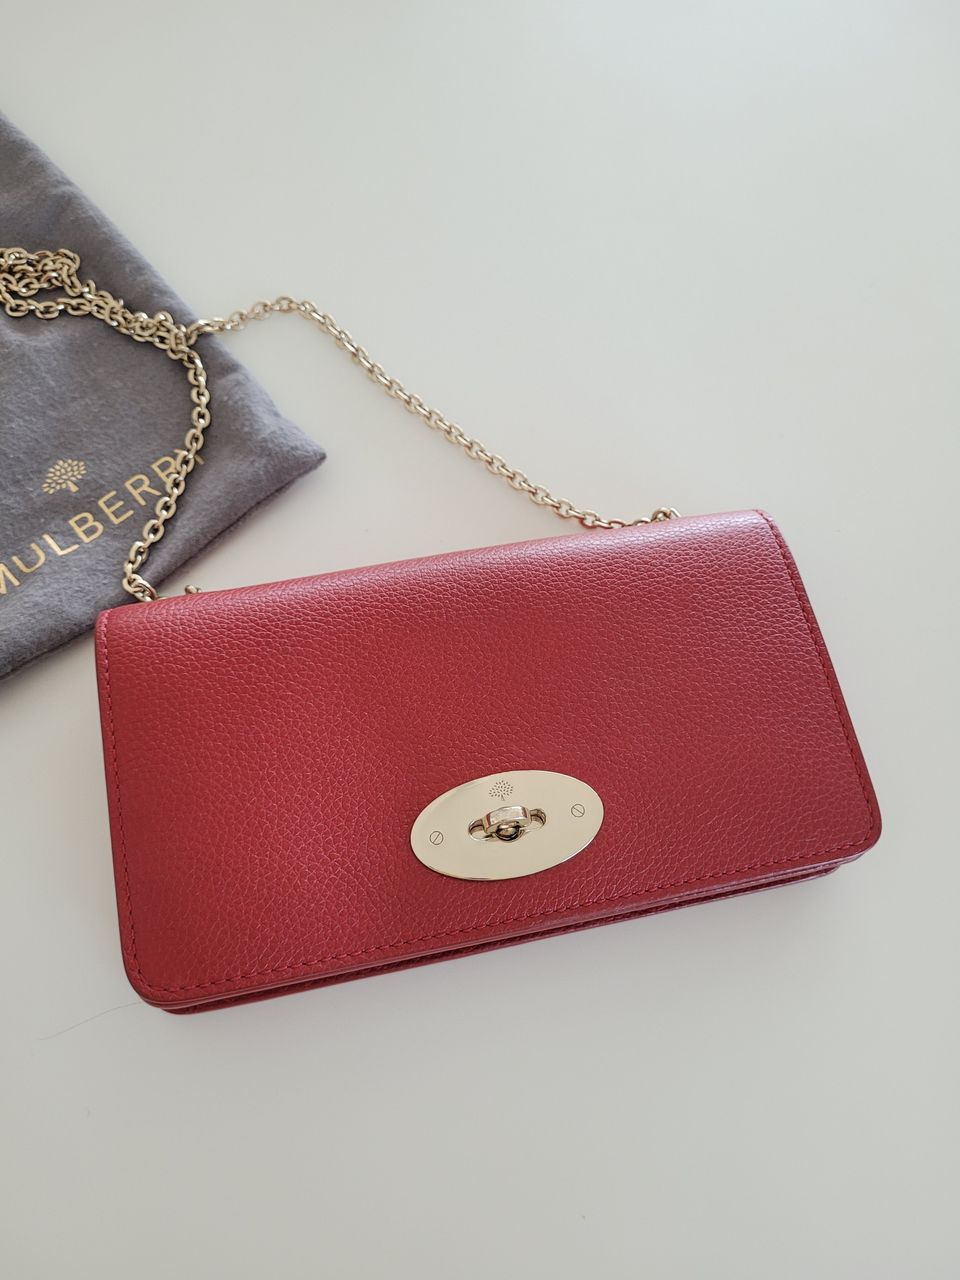 Mulberry Bayswater clutch